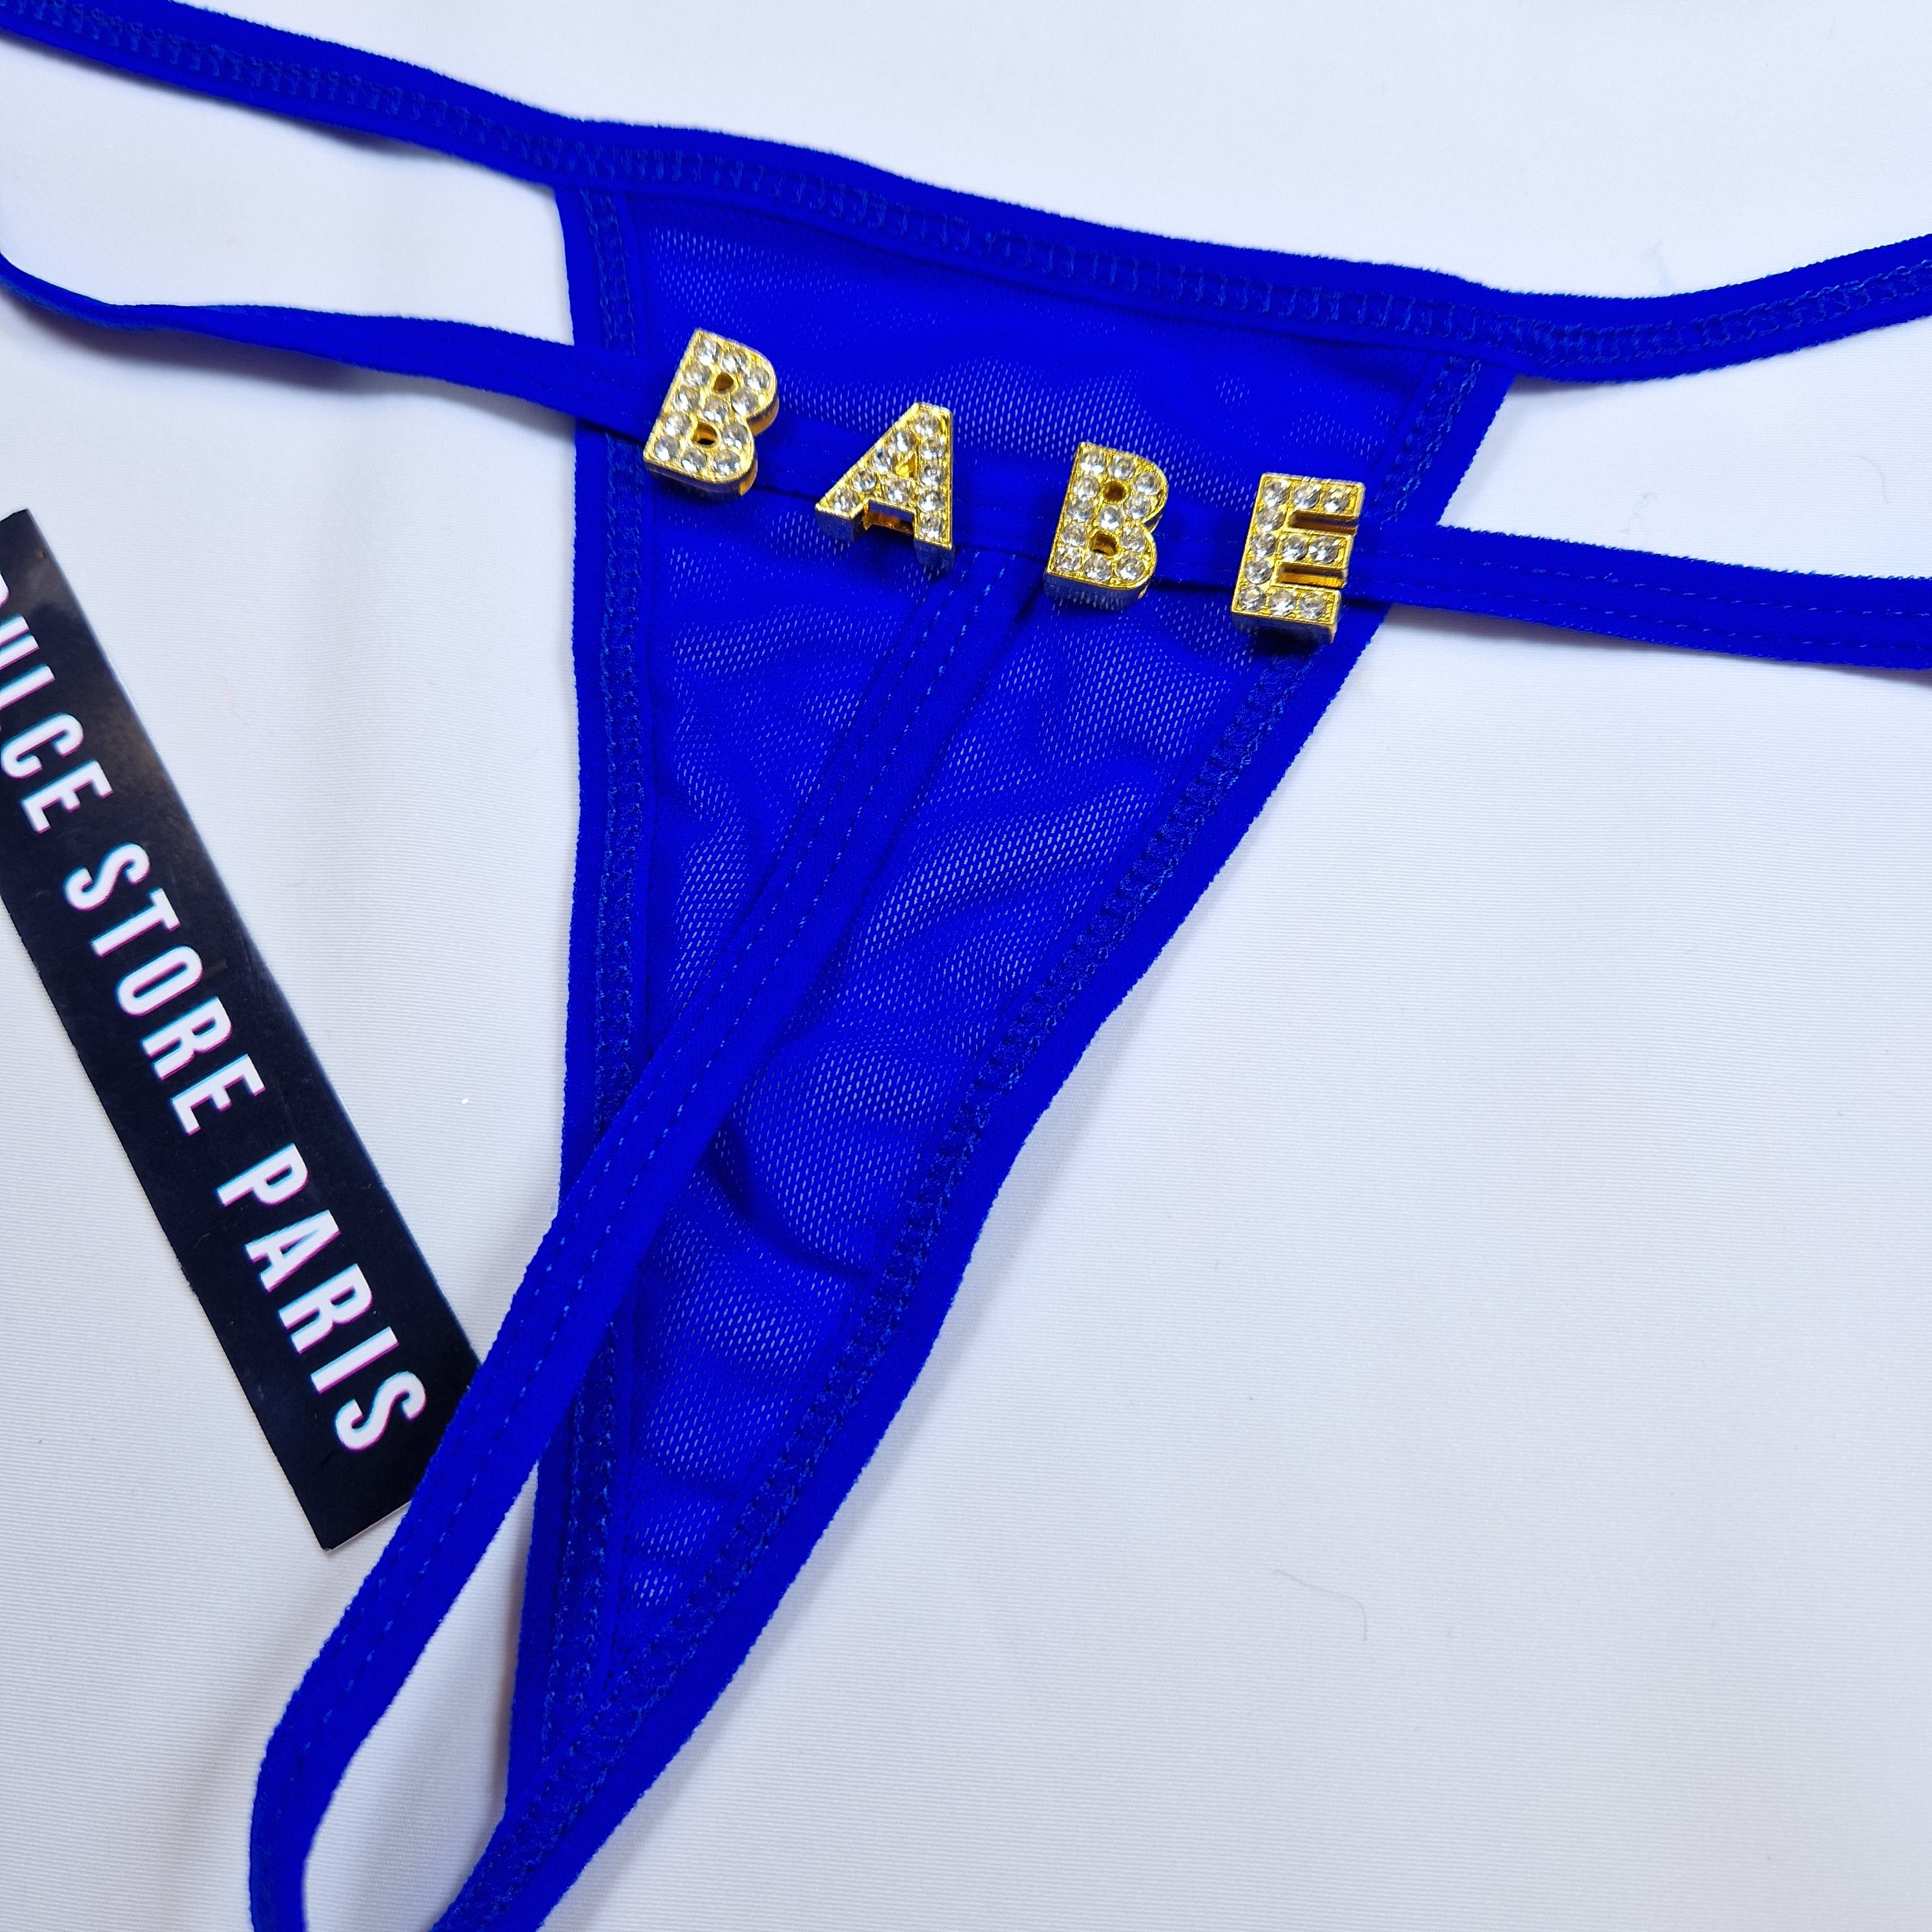 Personalized G-String & Ties